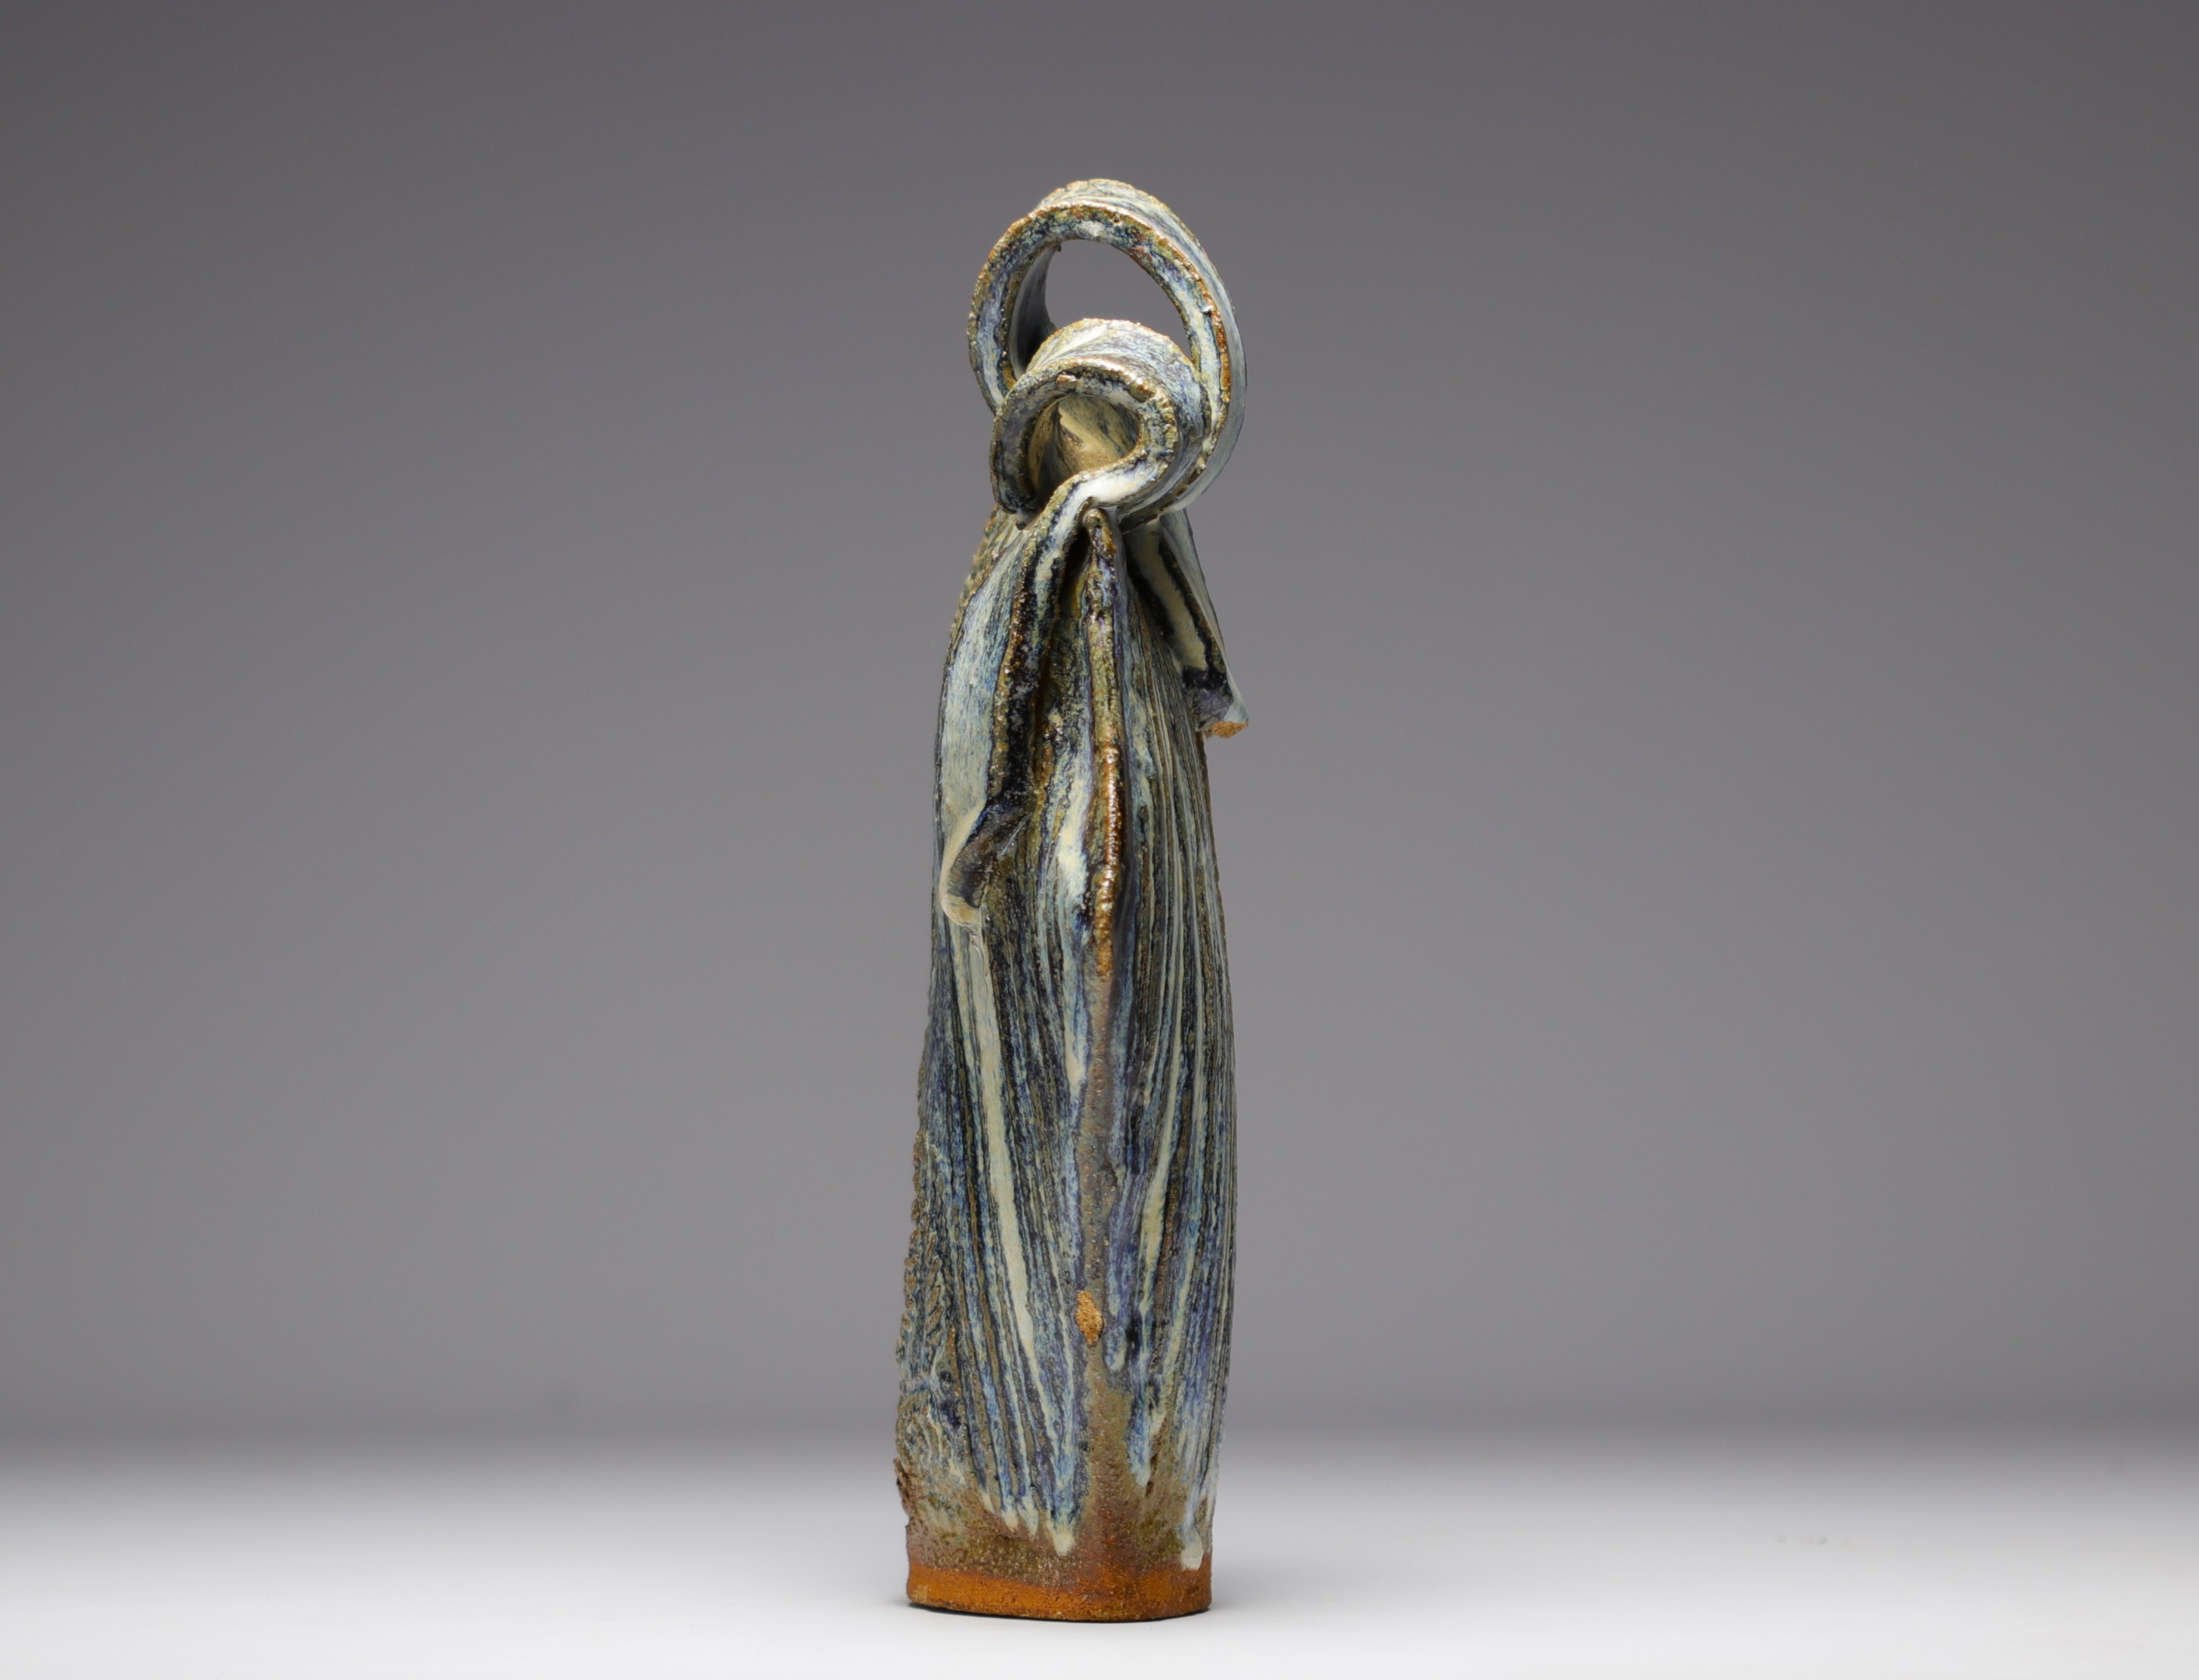 Zoomorphic sculpture in glazed terracotta, signed below the piece. - Image 4 of 5